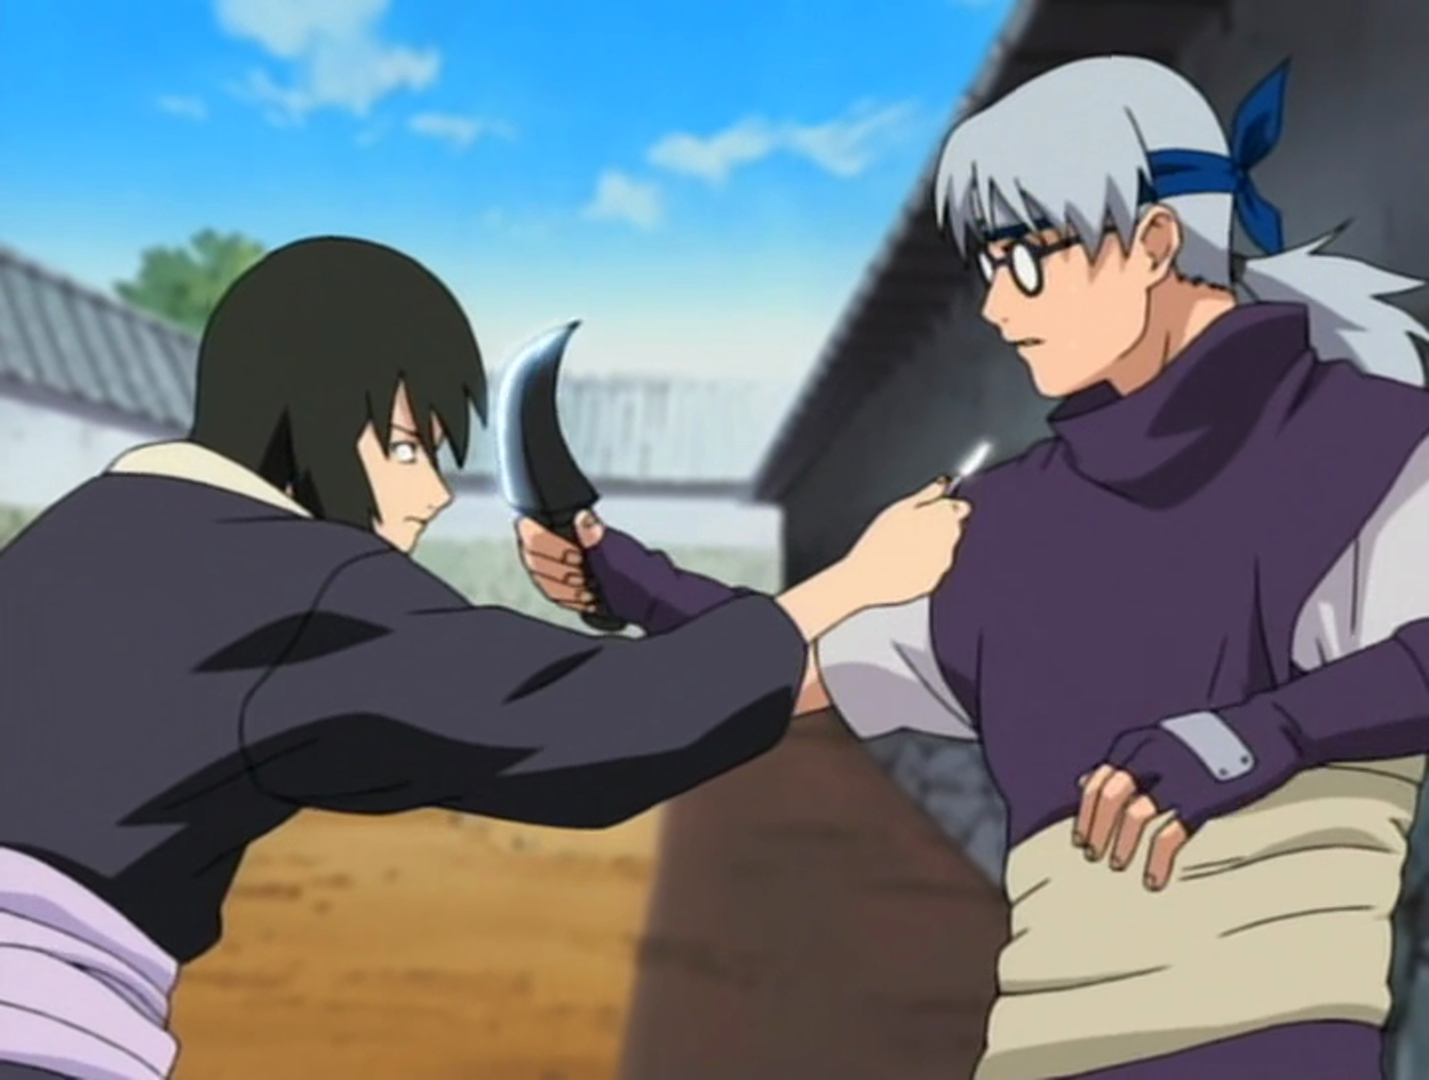 http://vignette4.wikia.nocookie.net/naruto/images/4/40/Shizune_and_Kabuto_clash.png/revision/latest?cb=20150129144747